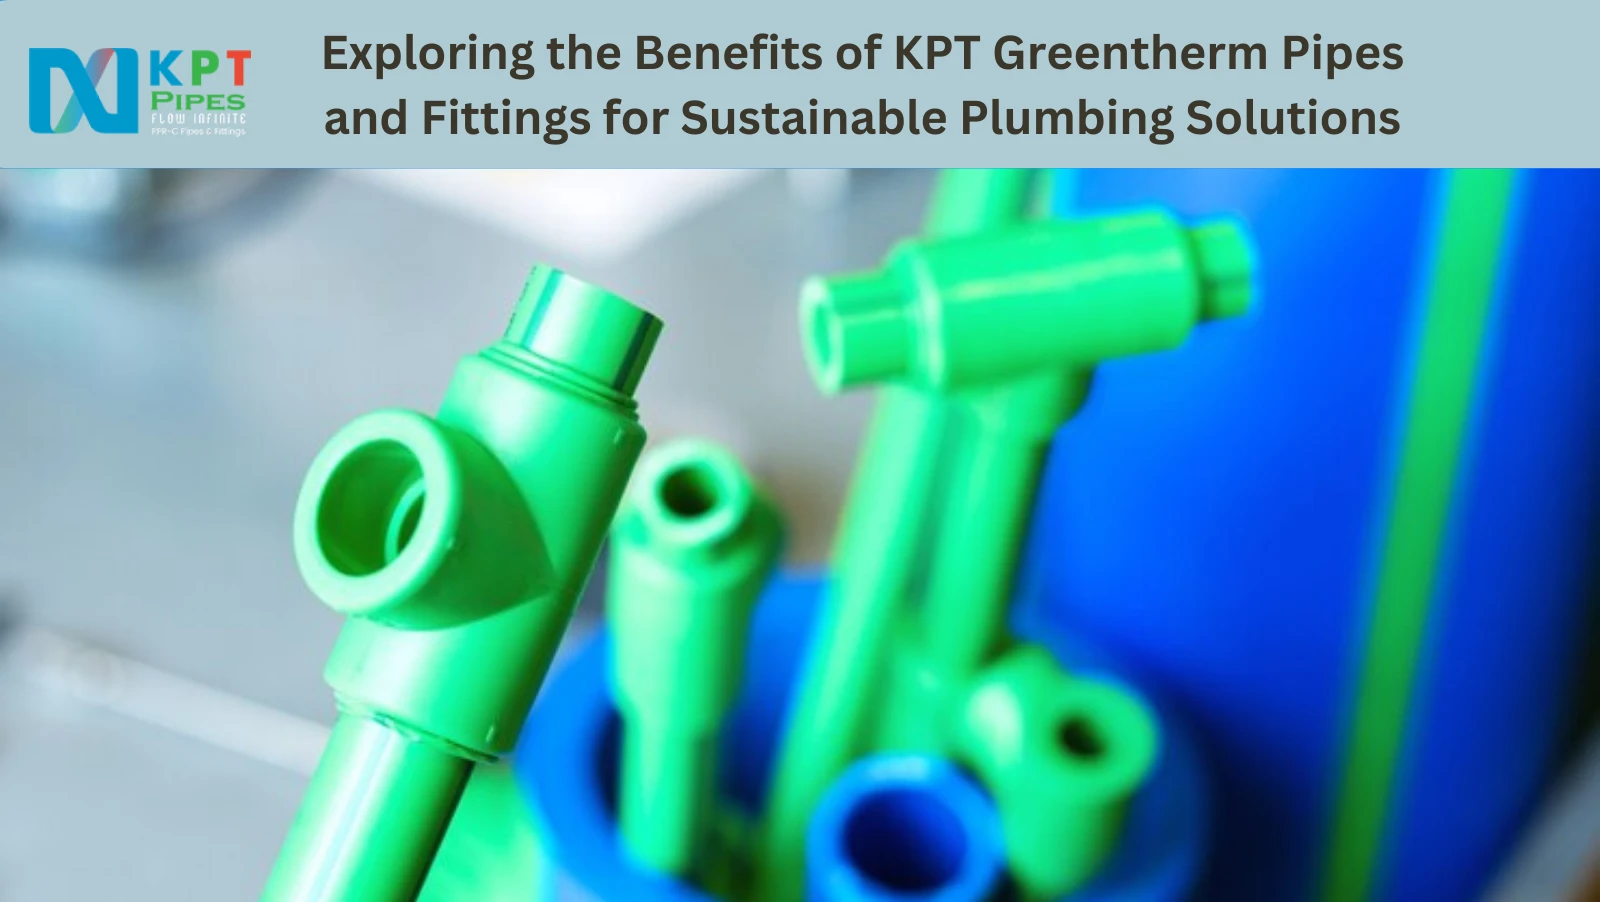 KPT Greentherm Pipes